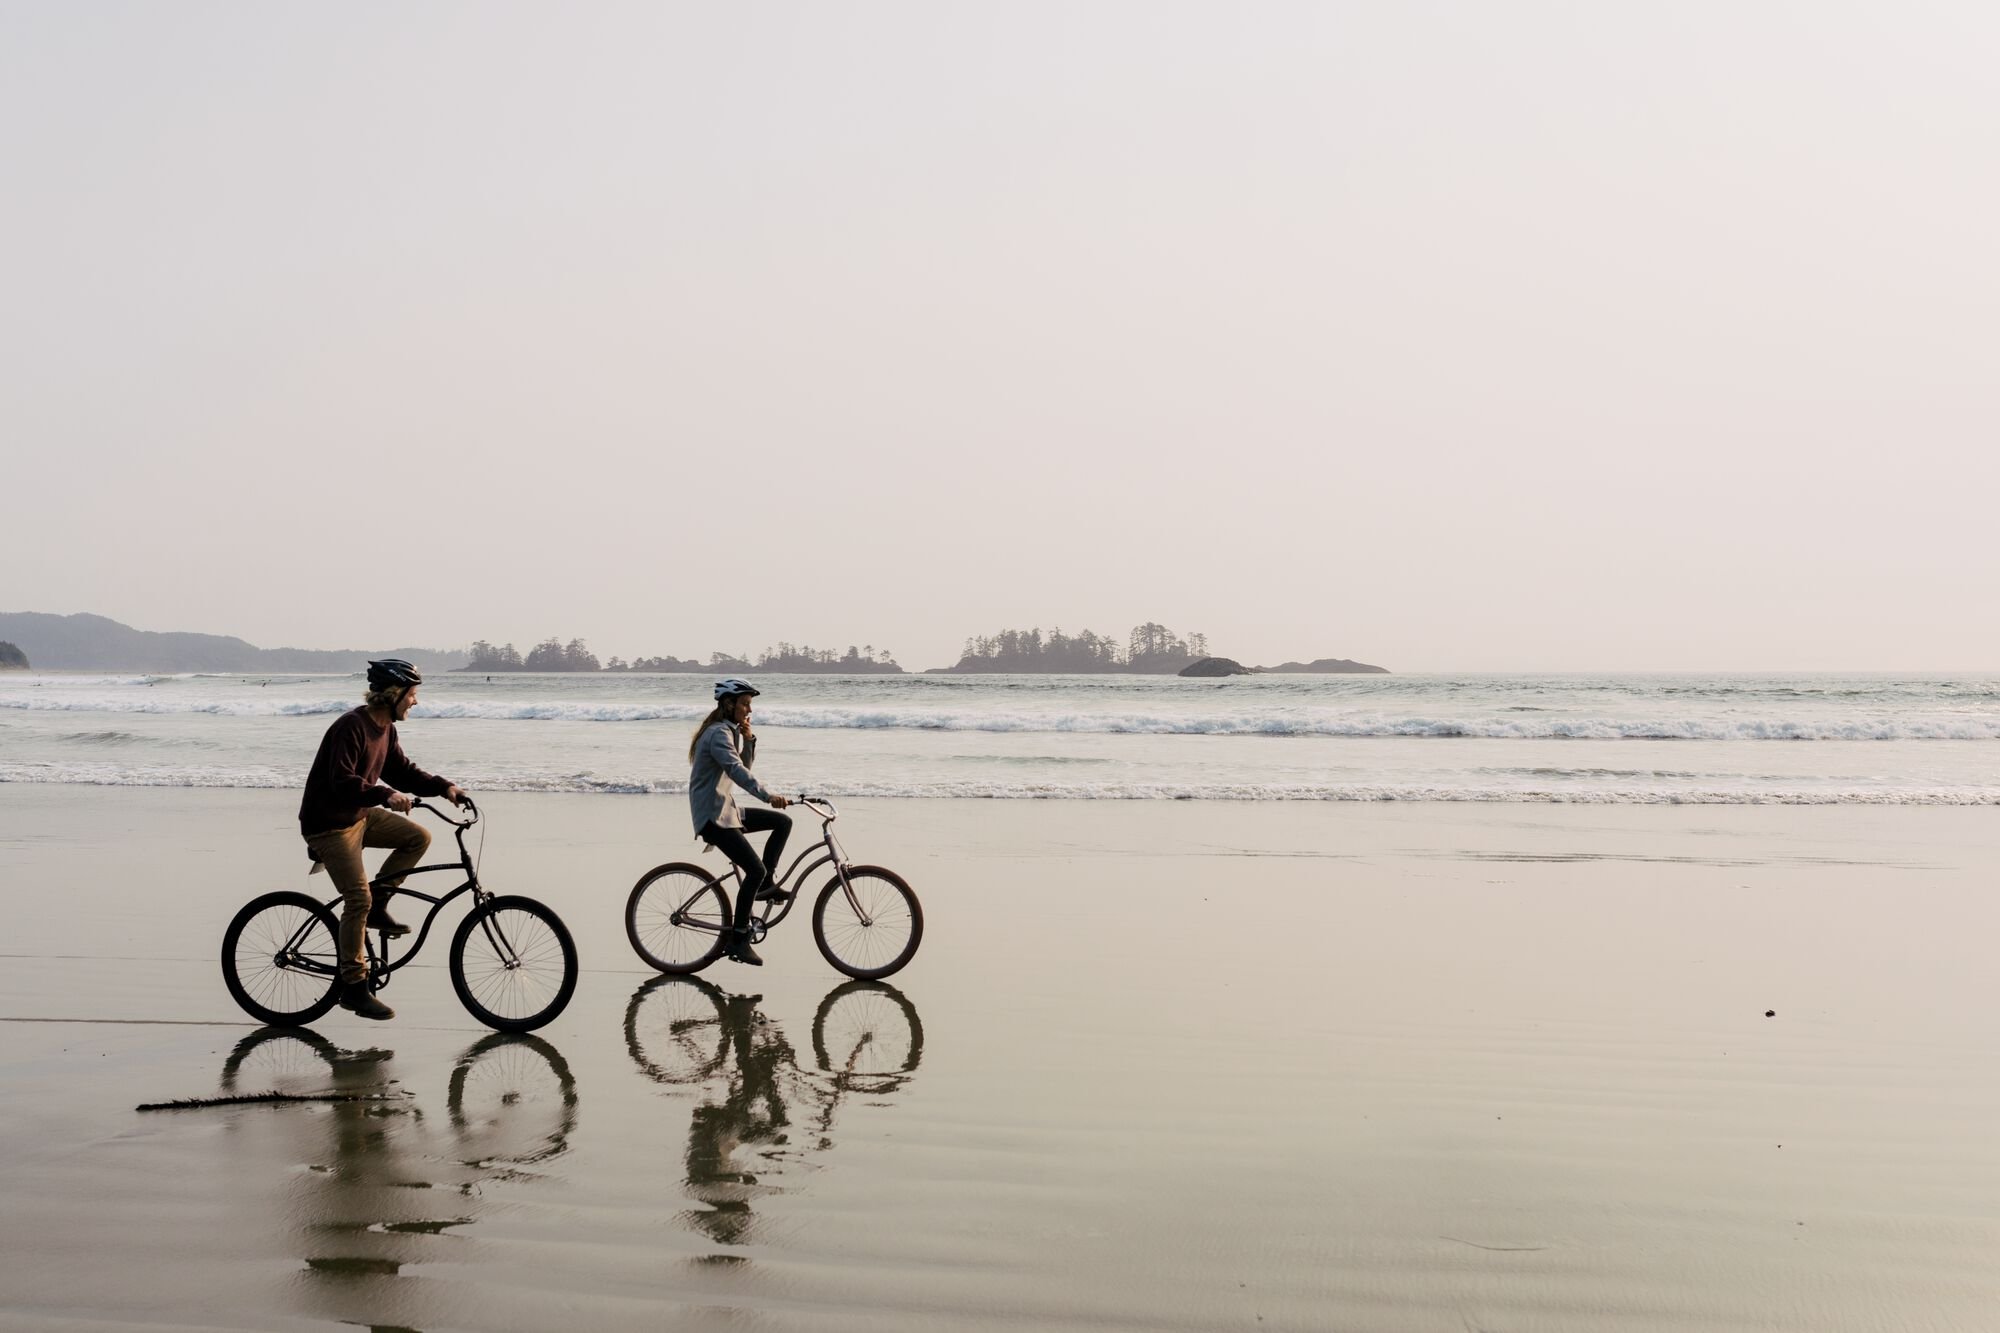 Couple riding bikes along the sand with the ocean and small islands off the coast behind them